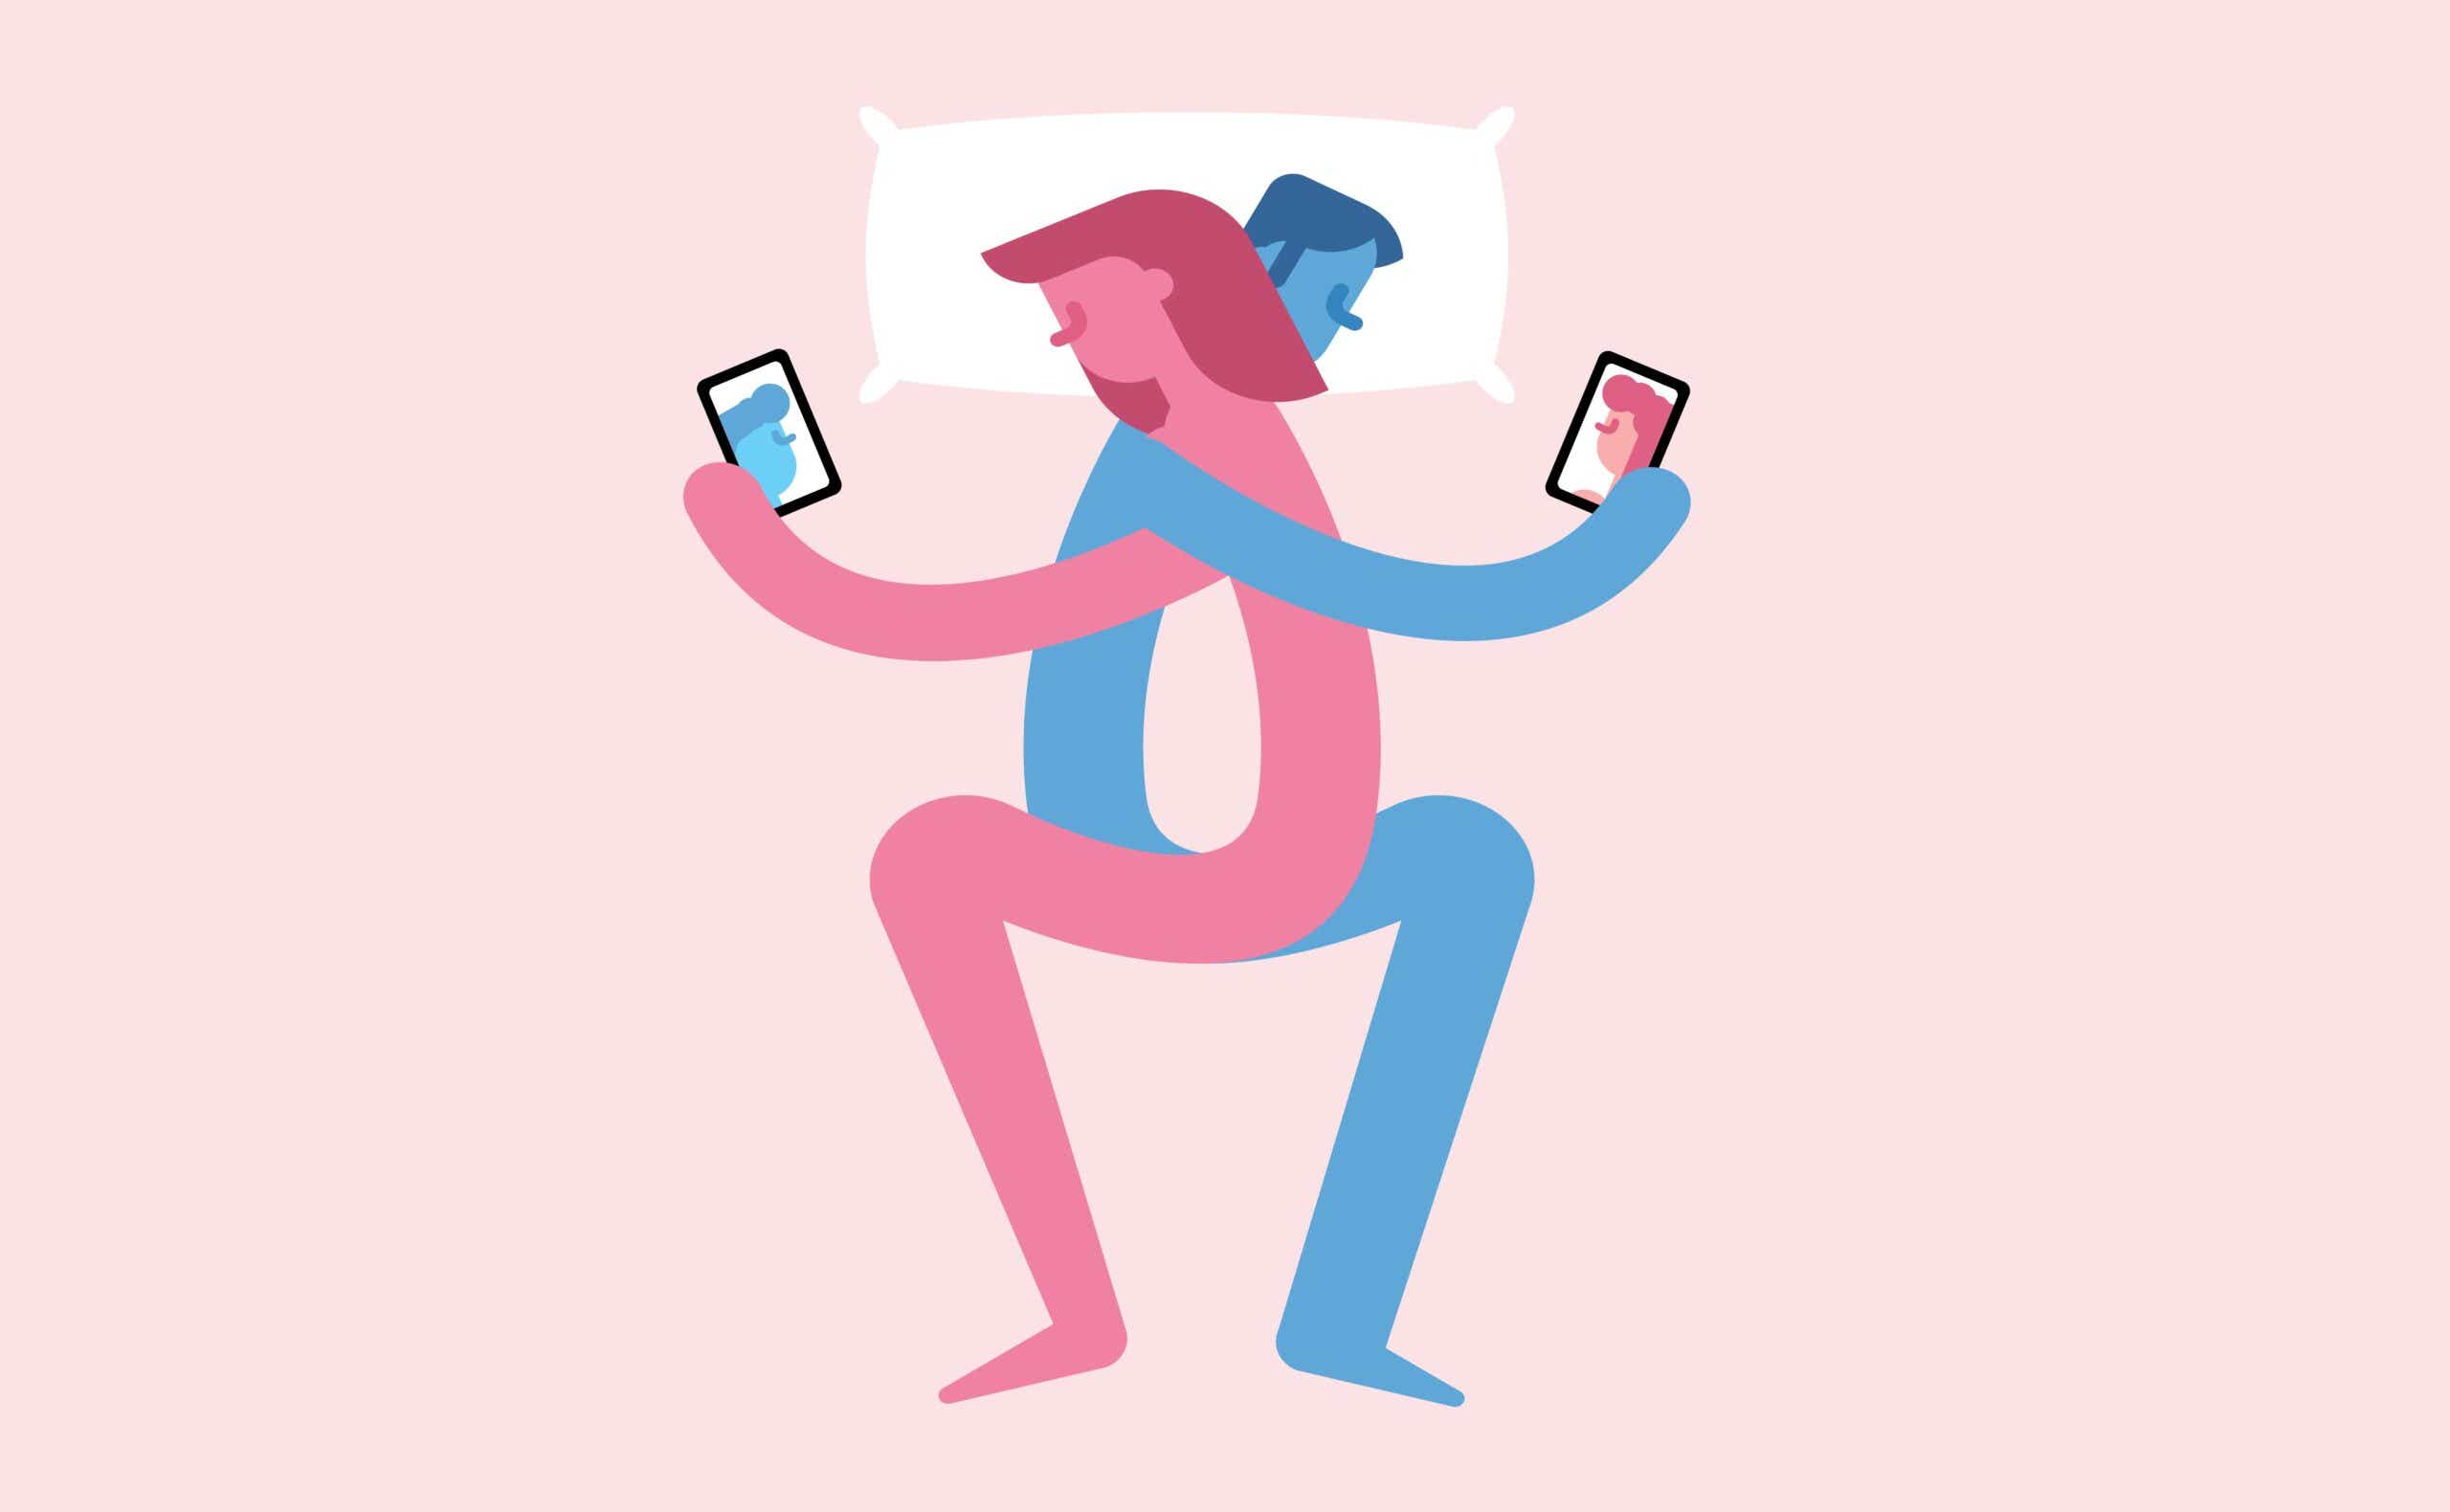 An illustration of couple laying intertwined while checking their phones.